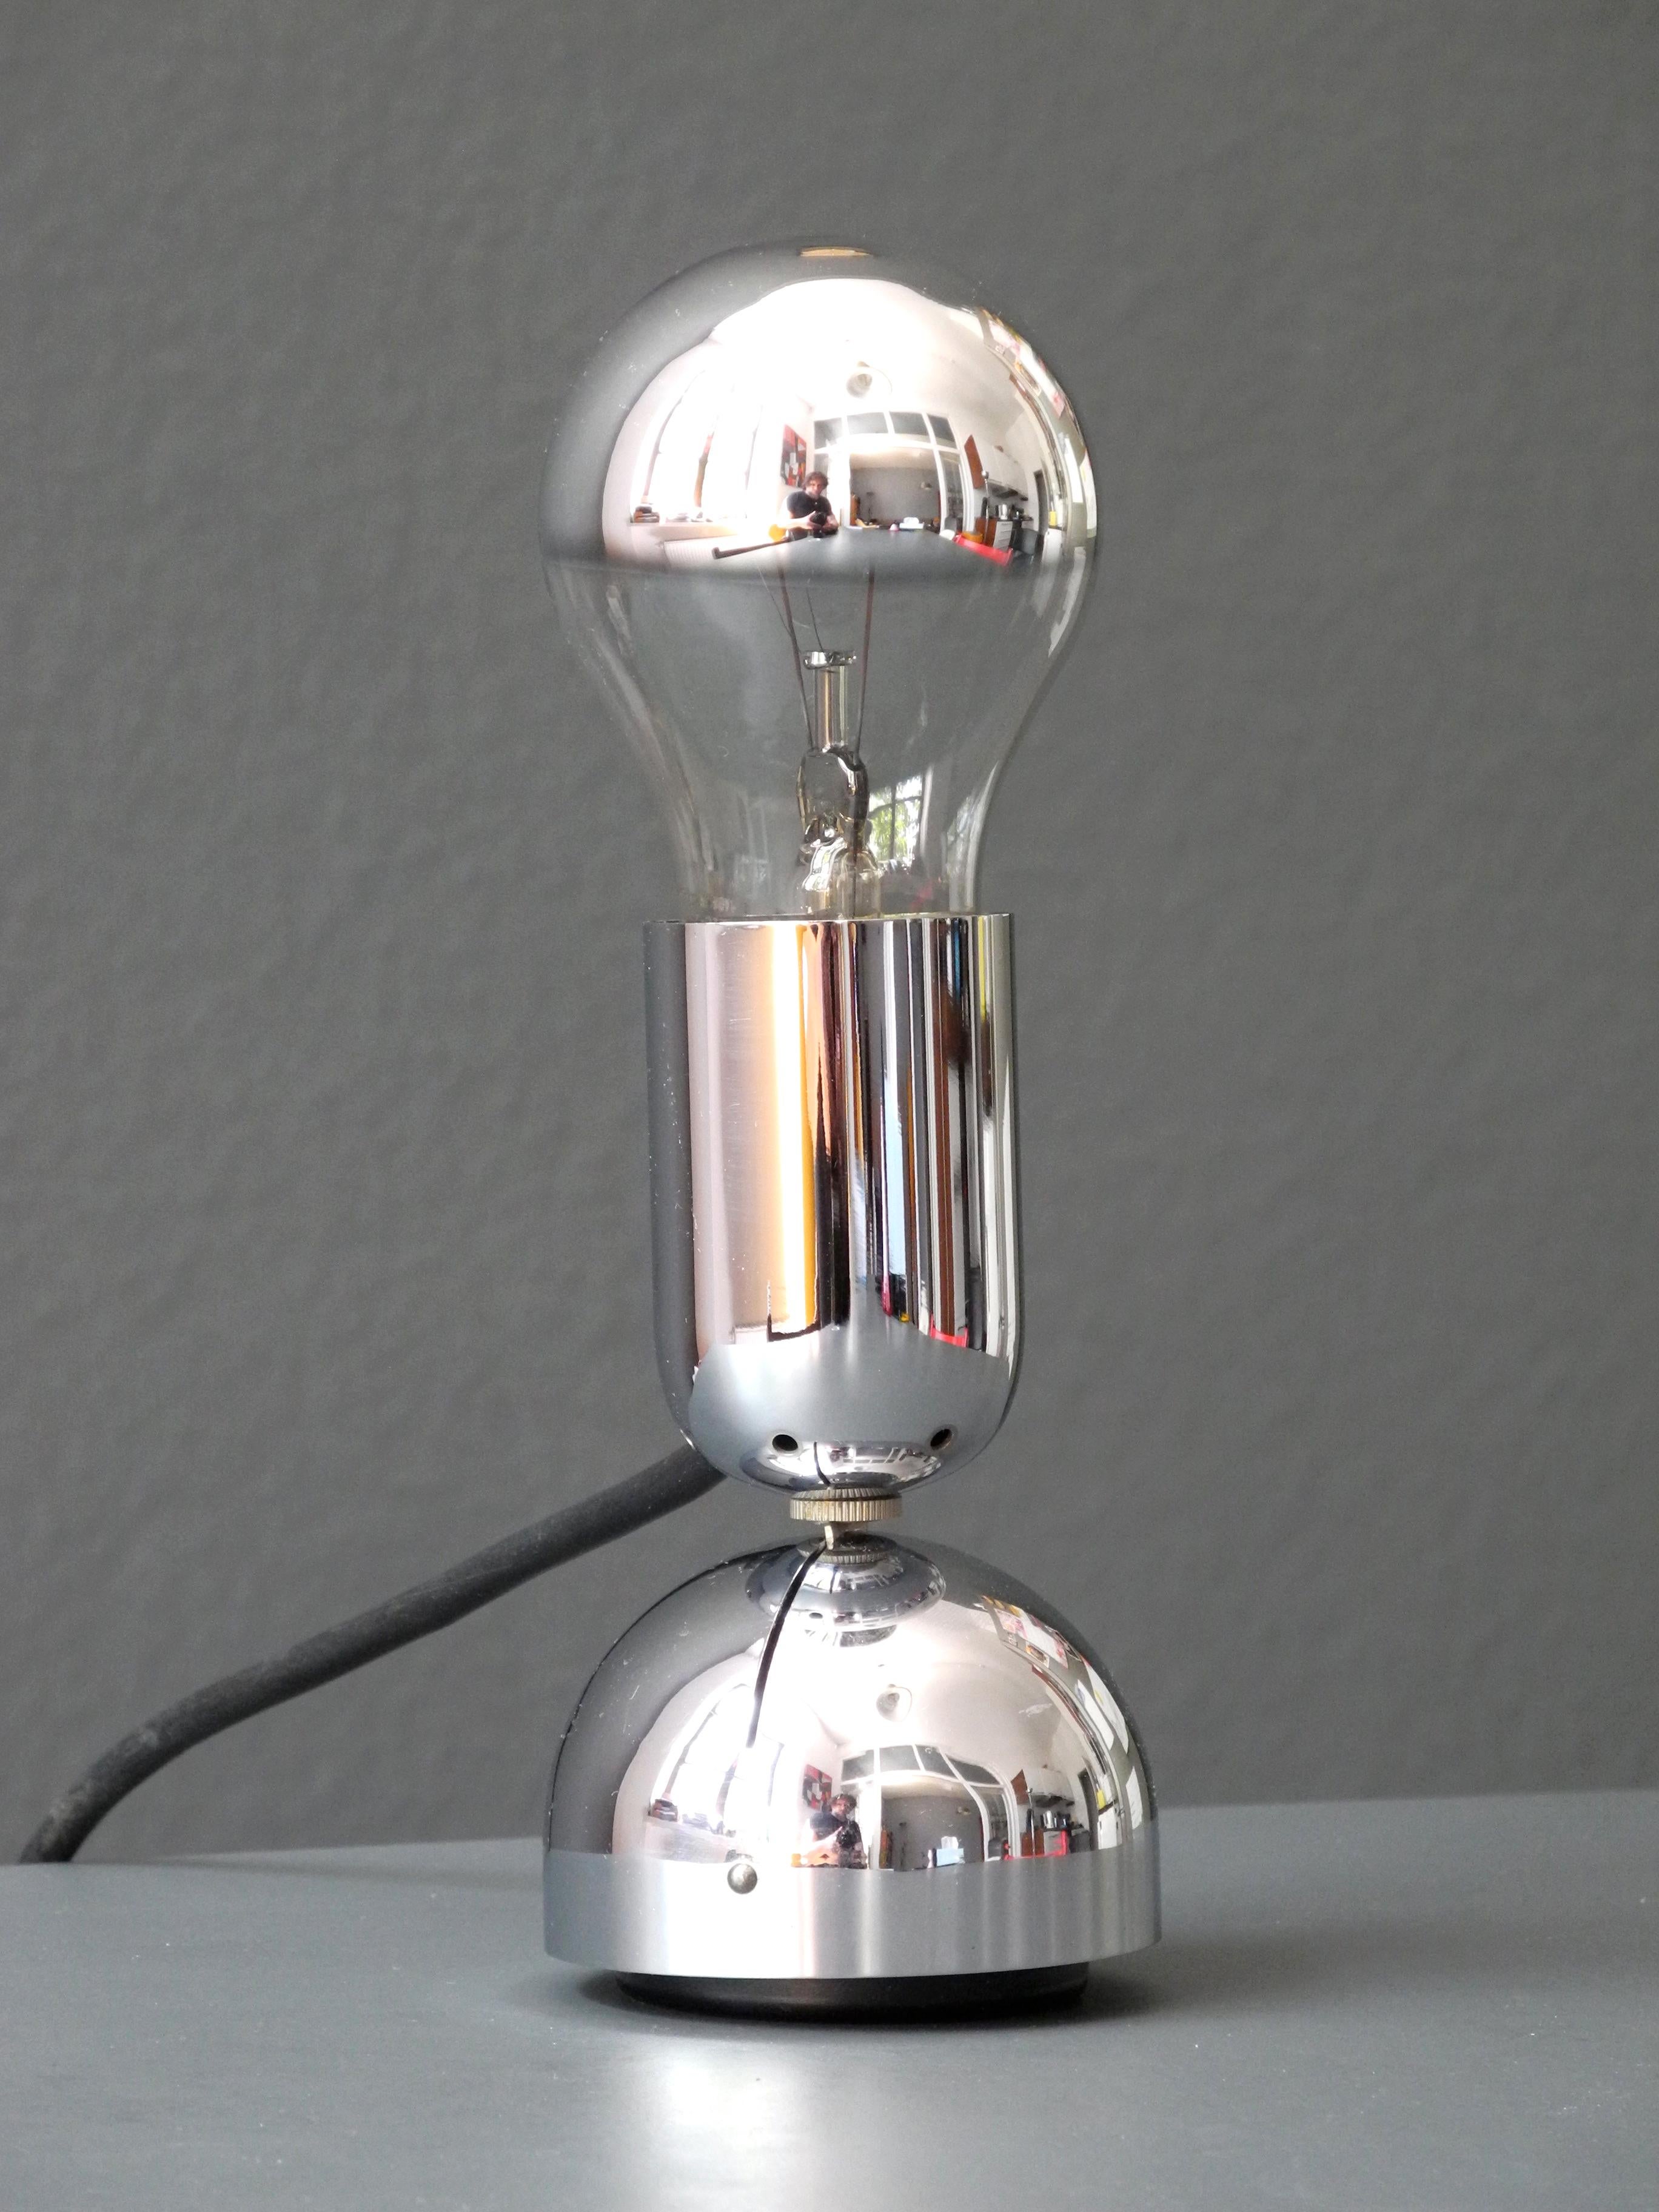 Original Pollux chrome table or wall lamp designed by Ingo Maurer for Design M.
Design from 1967. Very early version without plastic; basis plate made of metal.
100% original condition and fully functional, with original switch and plug.
One E27